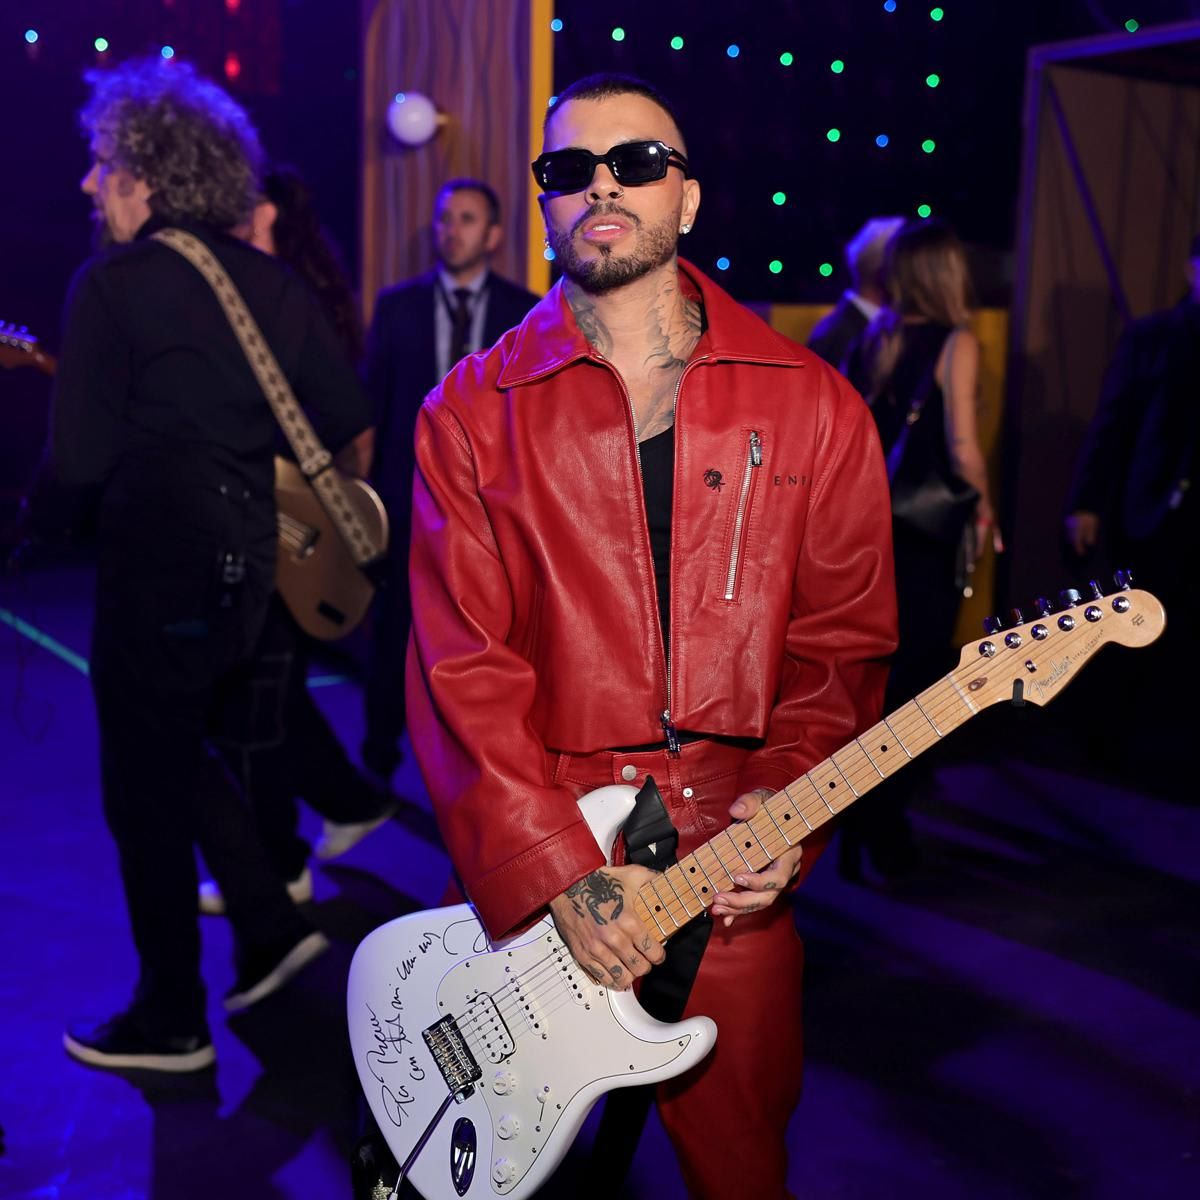 The 24th Annual Latin Grammy Awards   Backstage and Audience